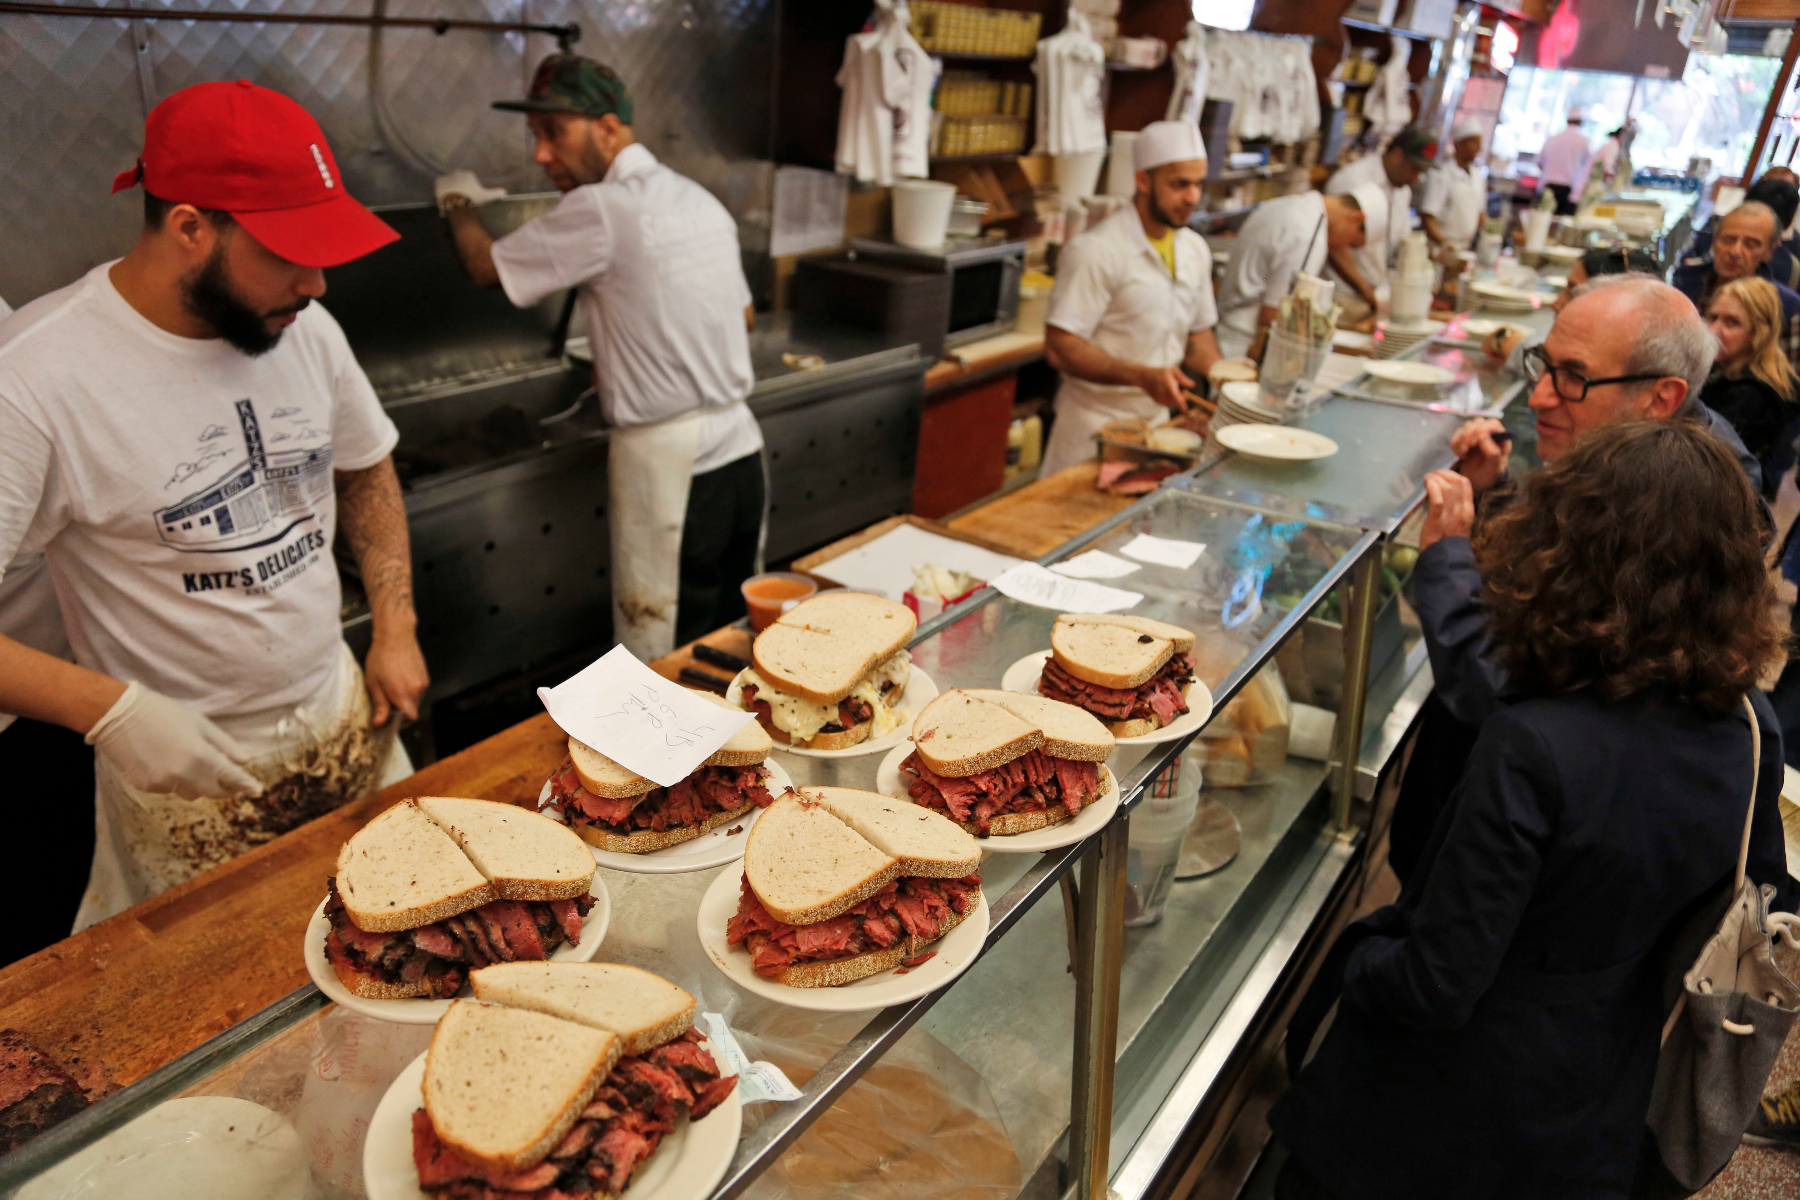 Katz's Deli's famous sandwiches attract hometown New Yorkers and tourists alike on the Lower East Side / Associated Press